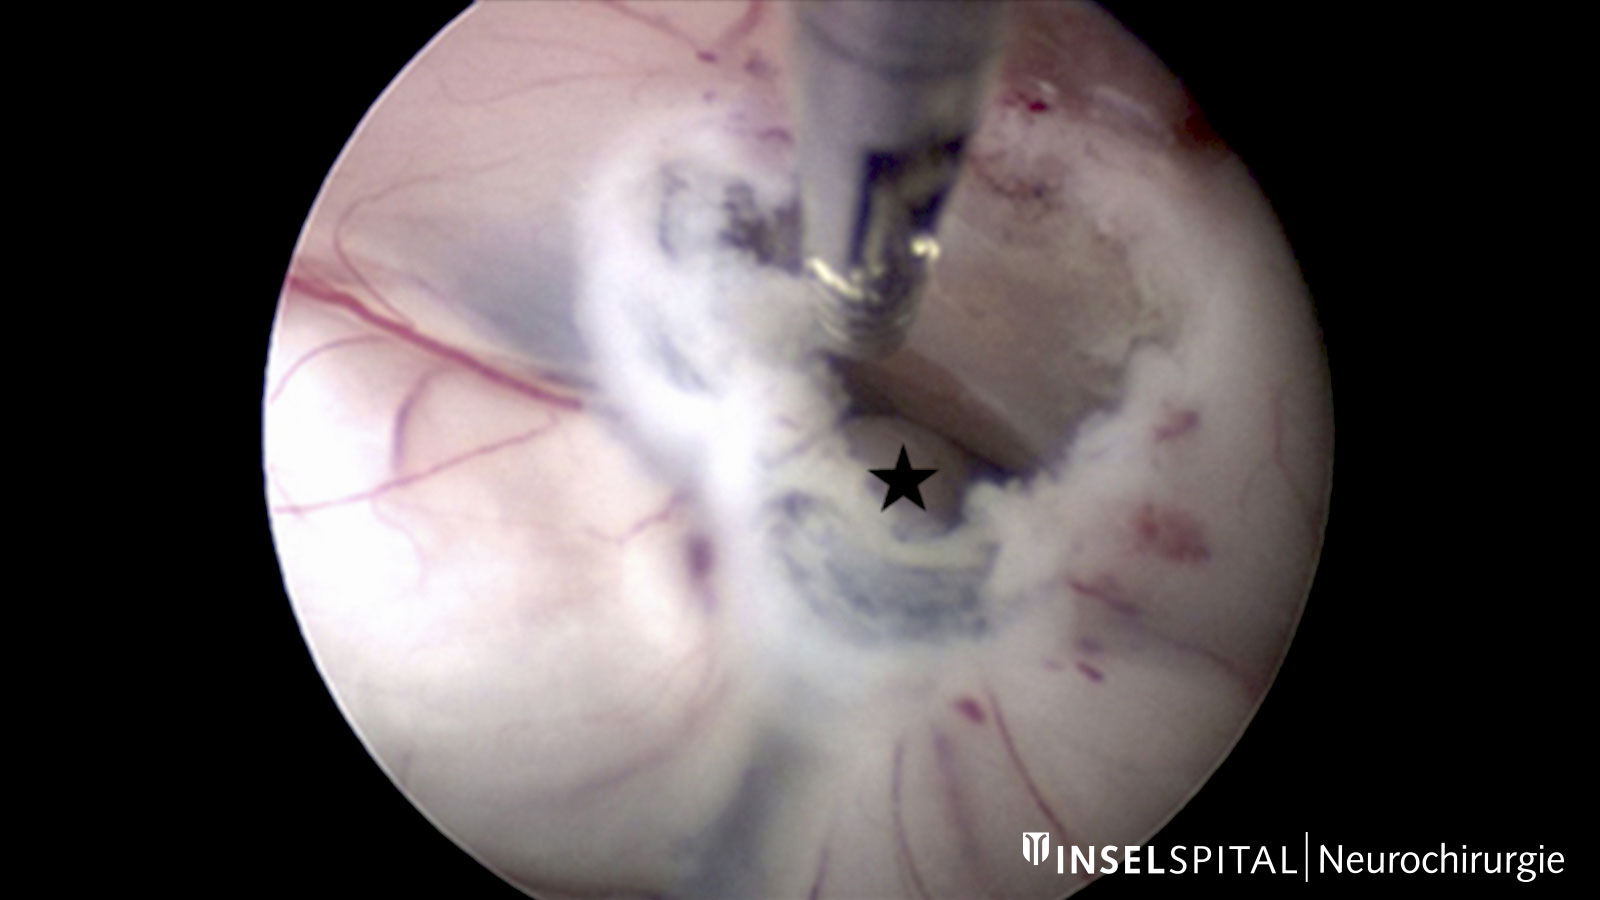 Endoscopic photo of an endoscopic third ventriculostomy for occlusive hydrocephalus